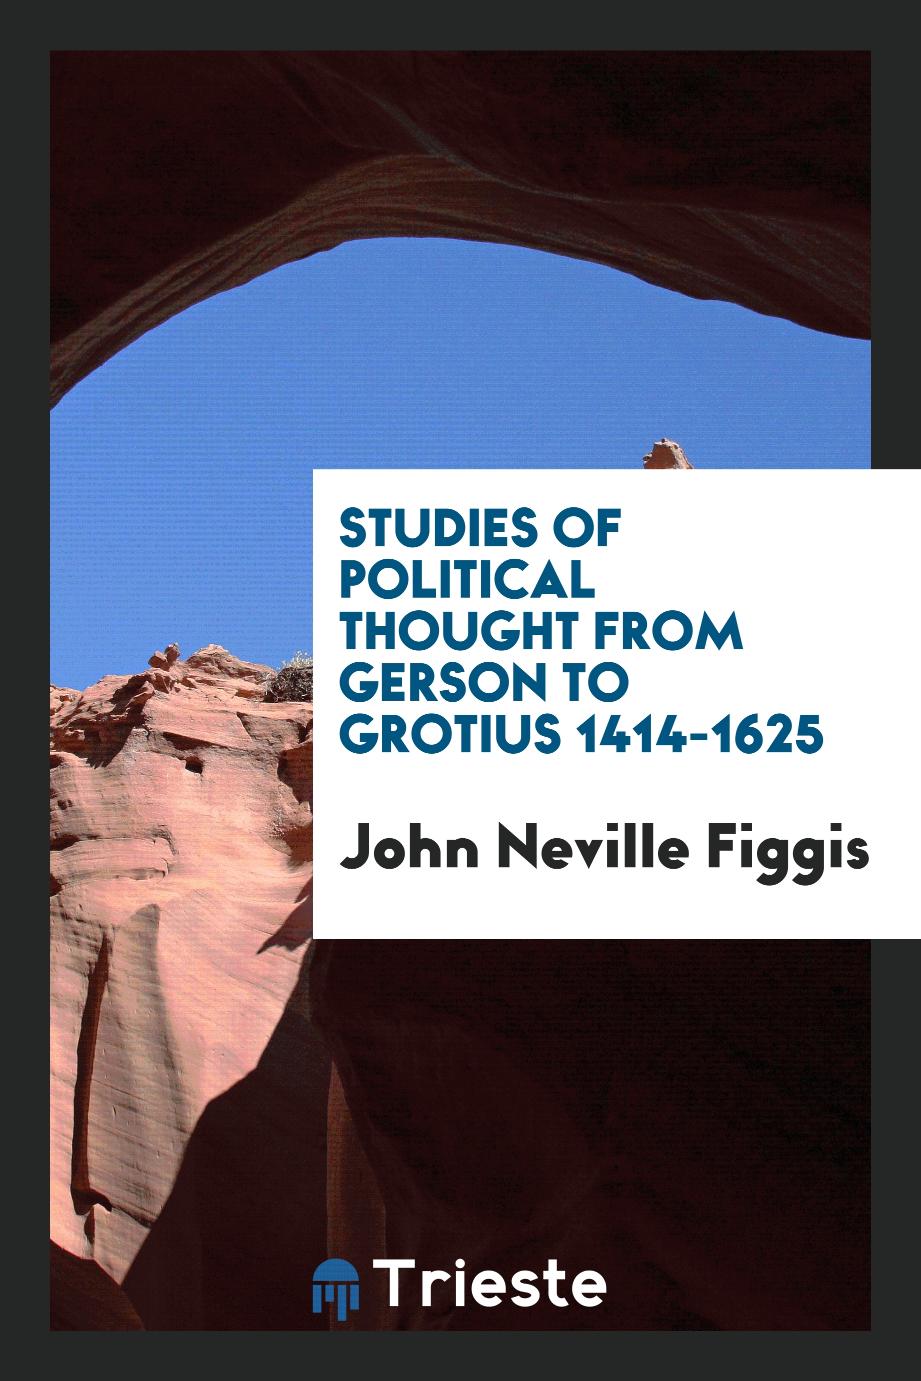 Studies of political thought from Gerson to Grotius 1414-1625